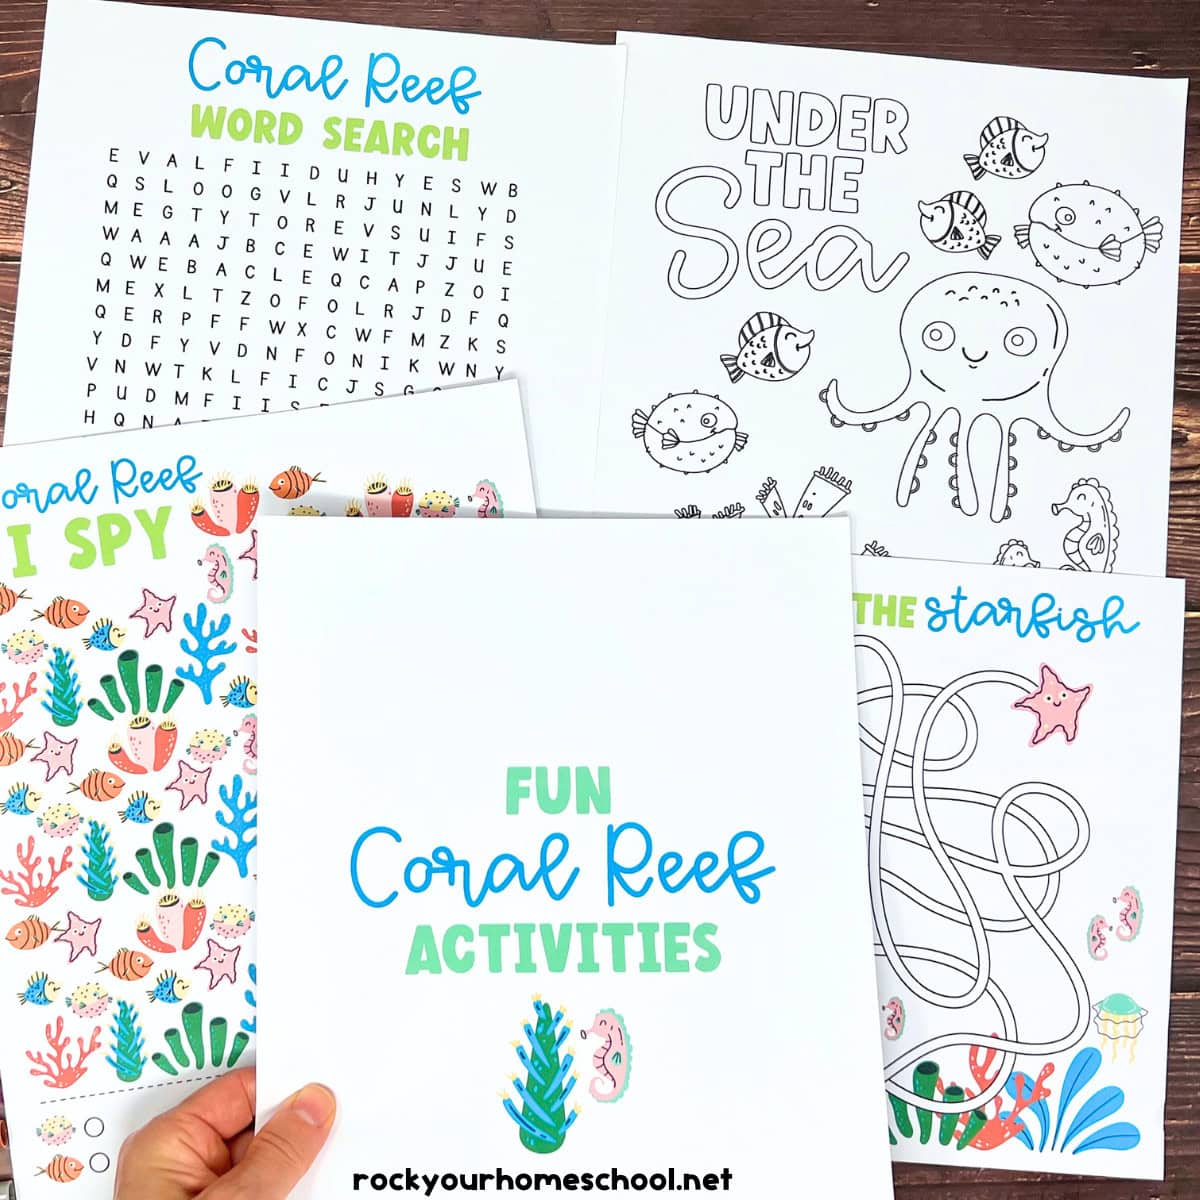 Coral Reef Activities for Kids with Under the Sea Fun (Free)